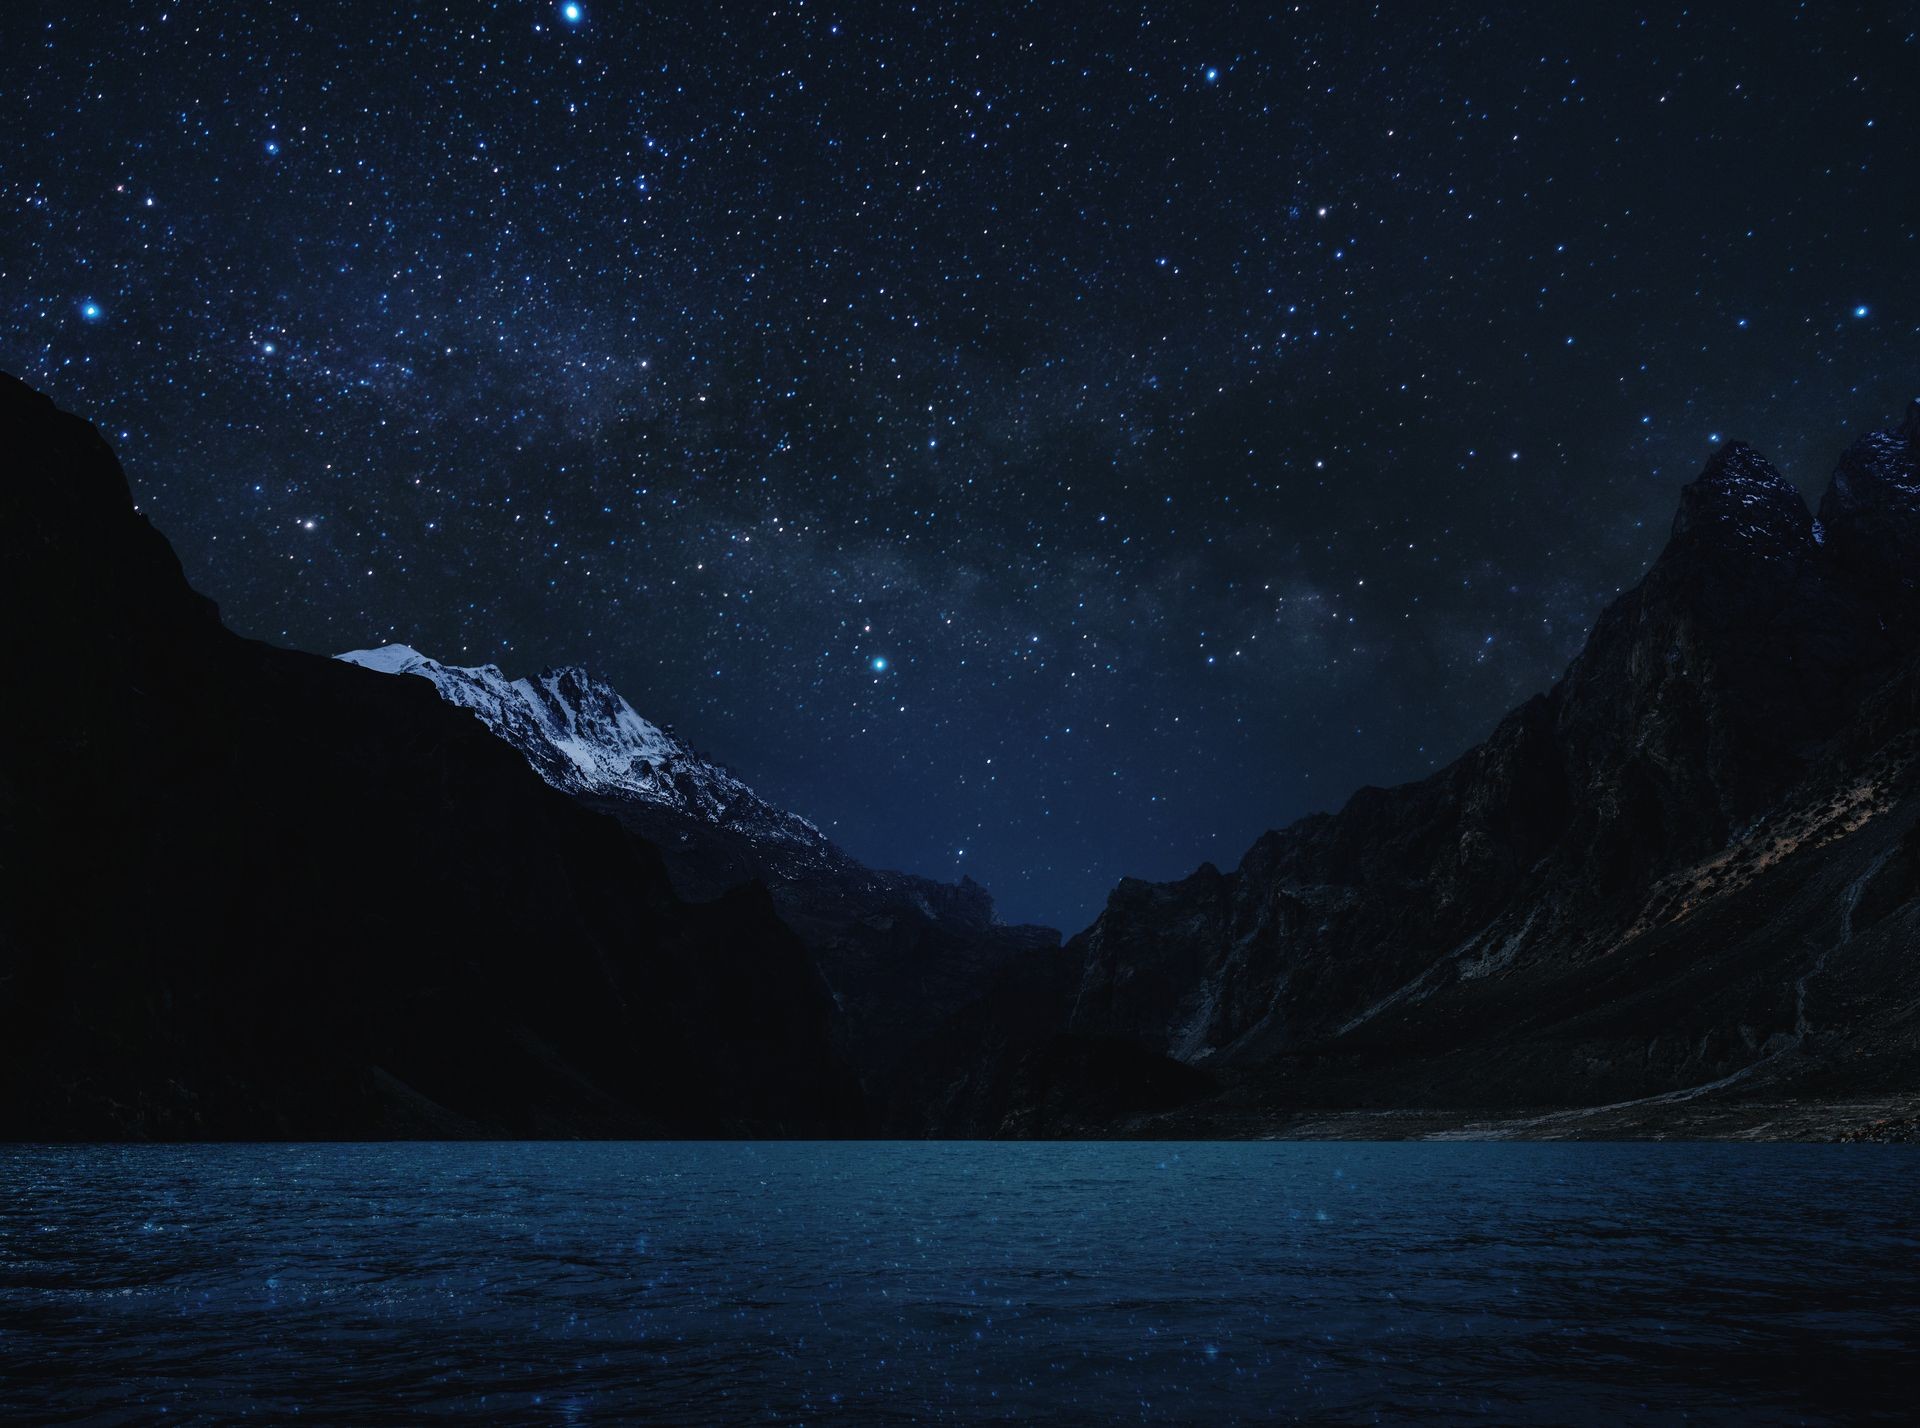 Night Landscape, Silhouette mountain with lake and sky full of star with milky way